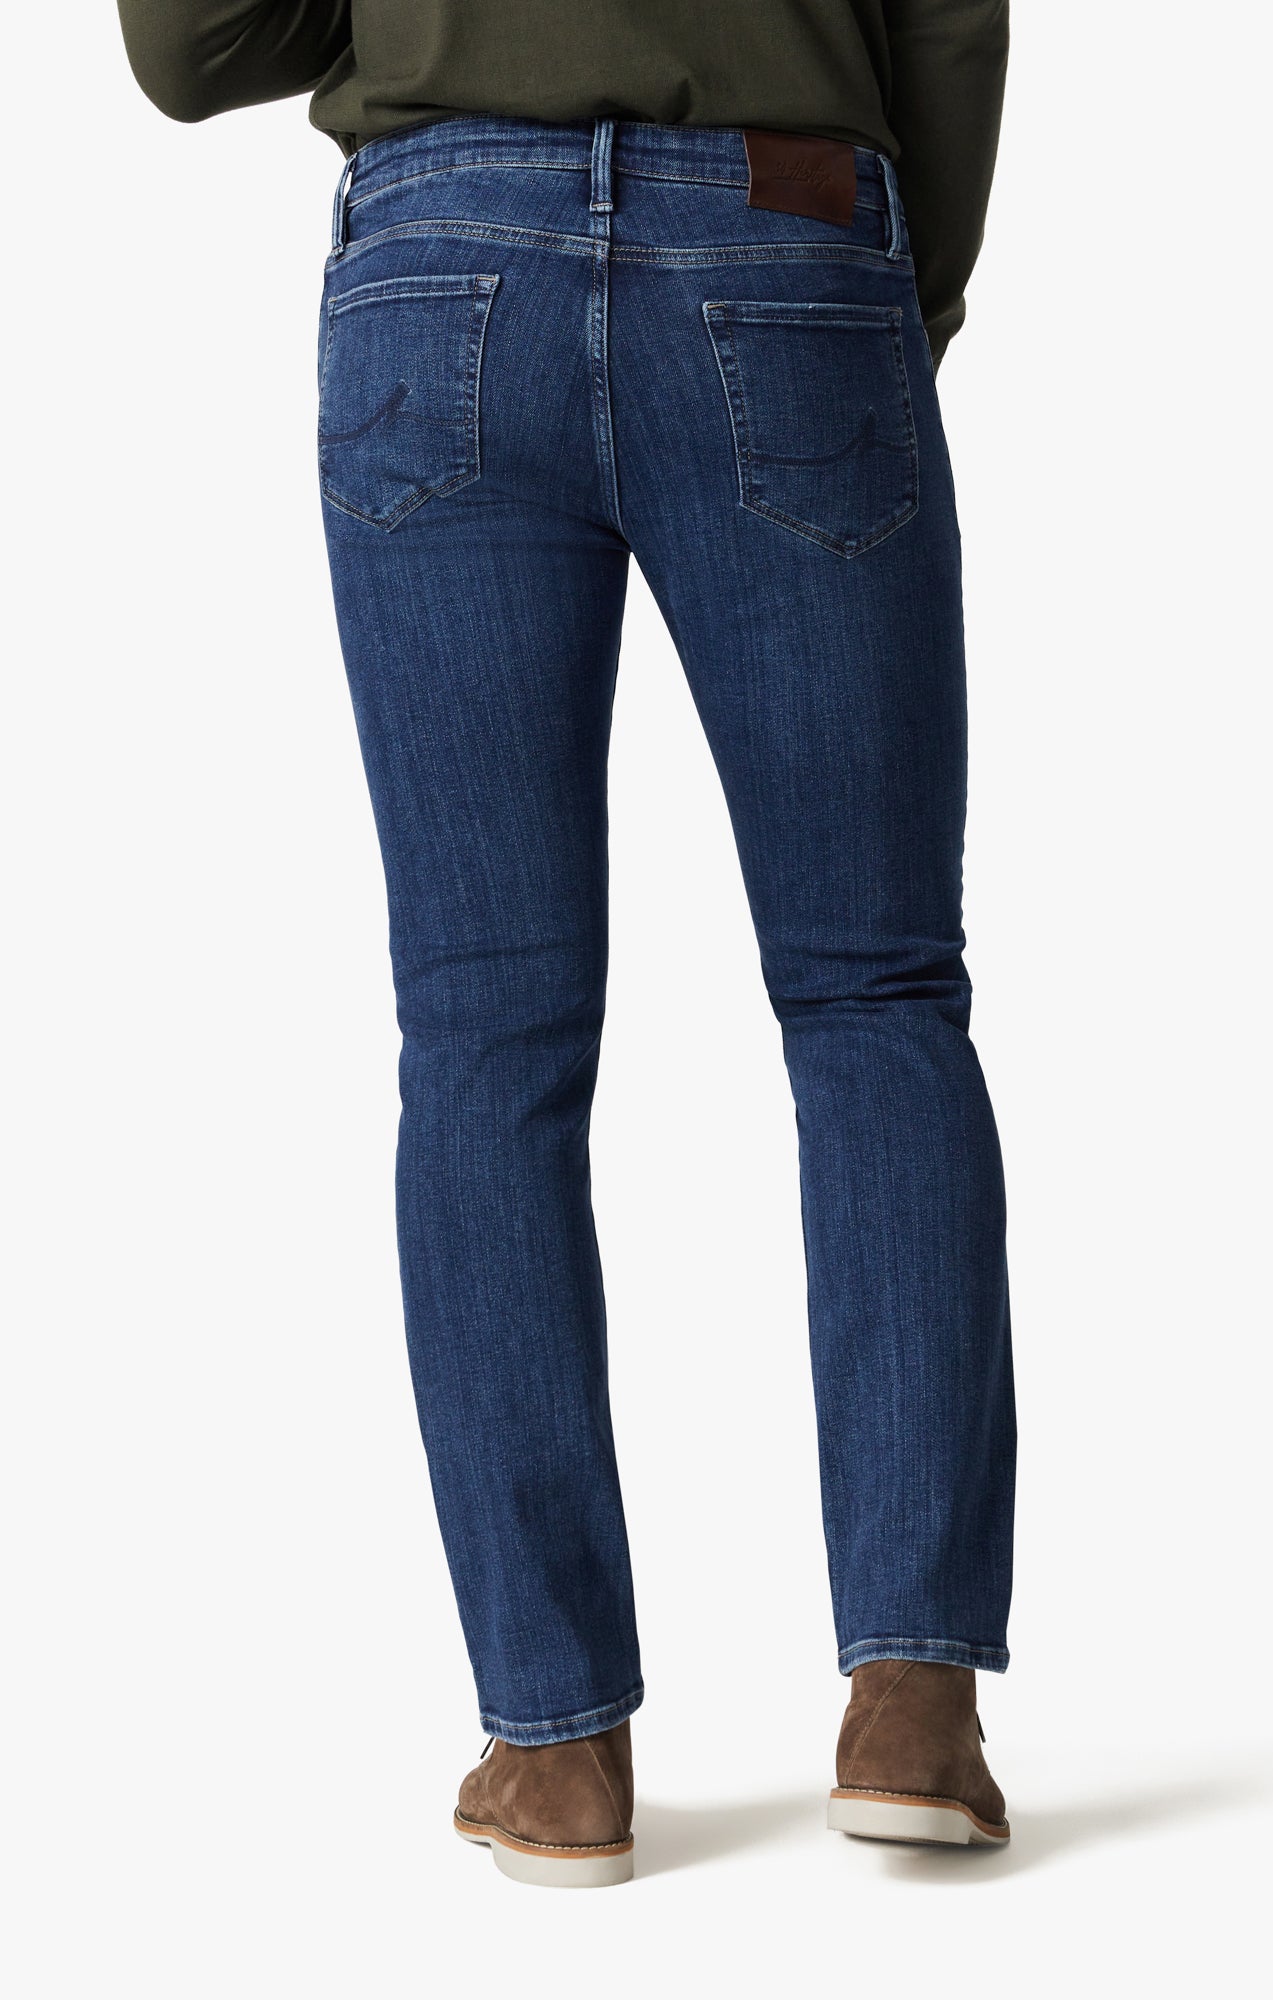 Courage Straight Leg Jeans in Deep Brushed Organic Image 4